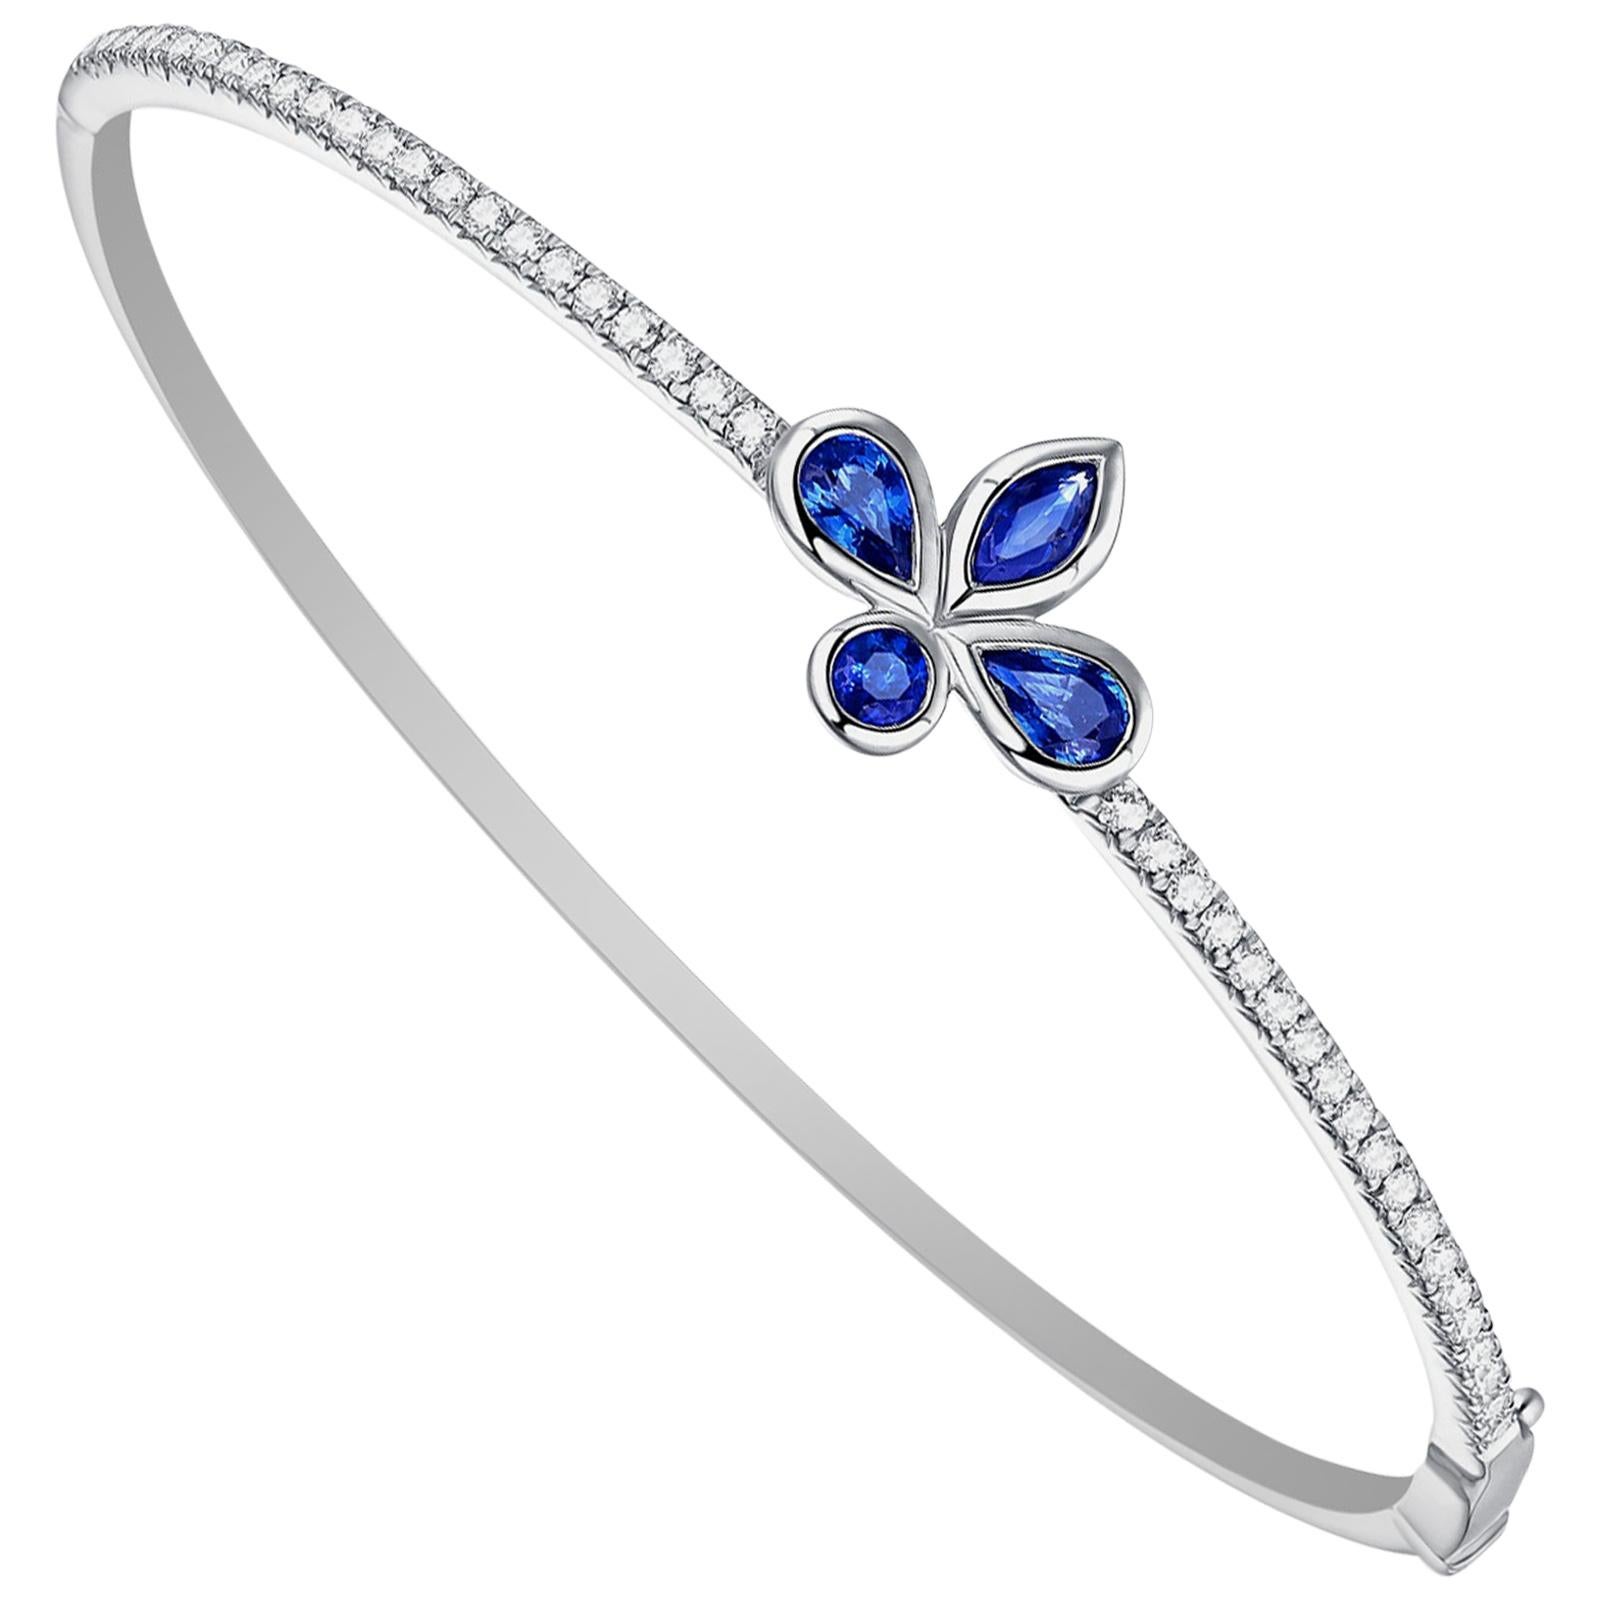 Blue Sapphire and Diamond Bangle Bracelet by Luvente - Jewelry By Designs